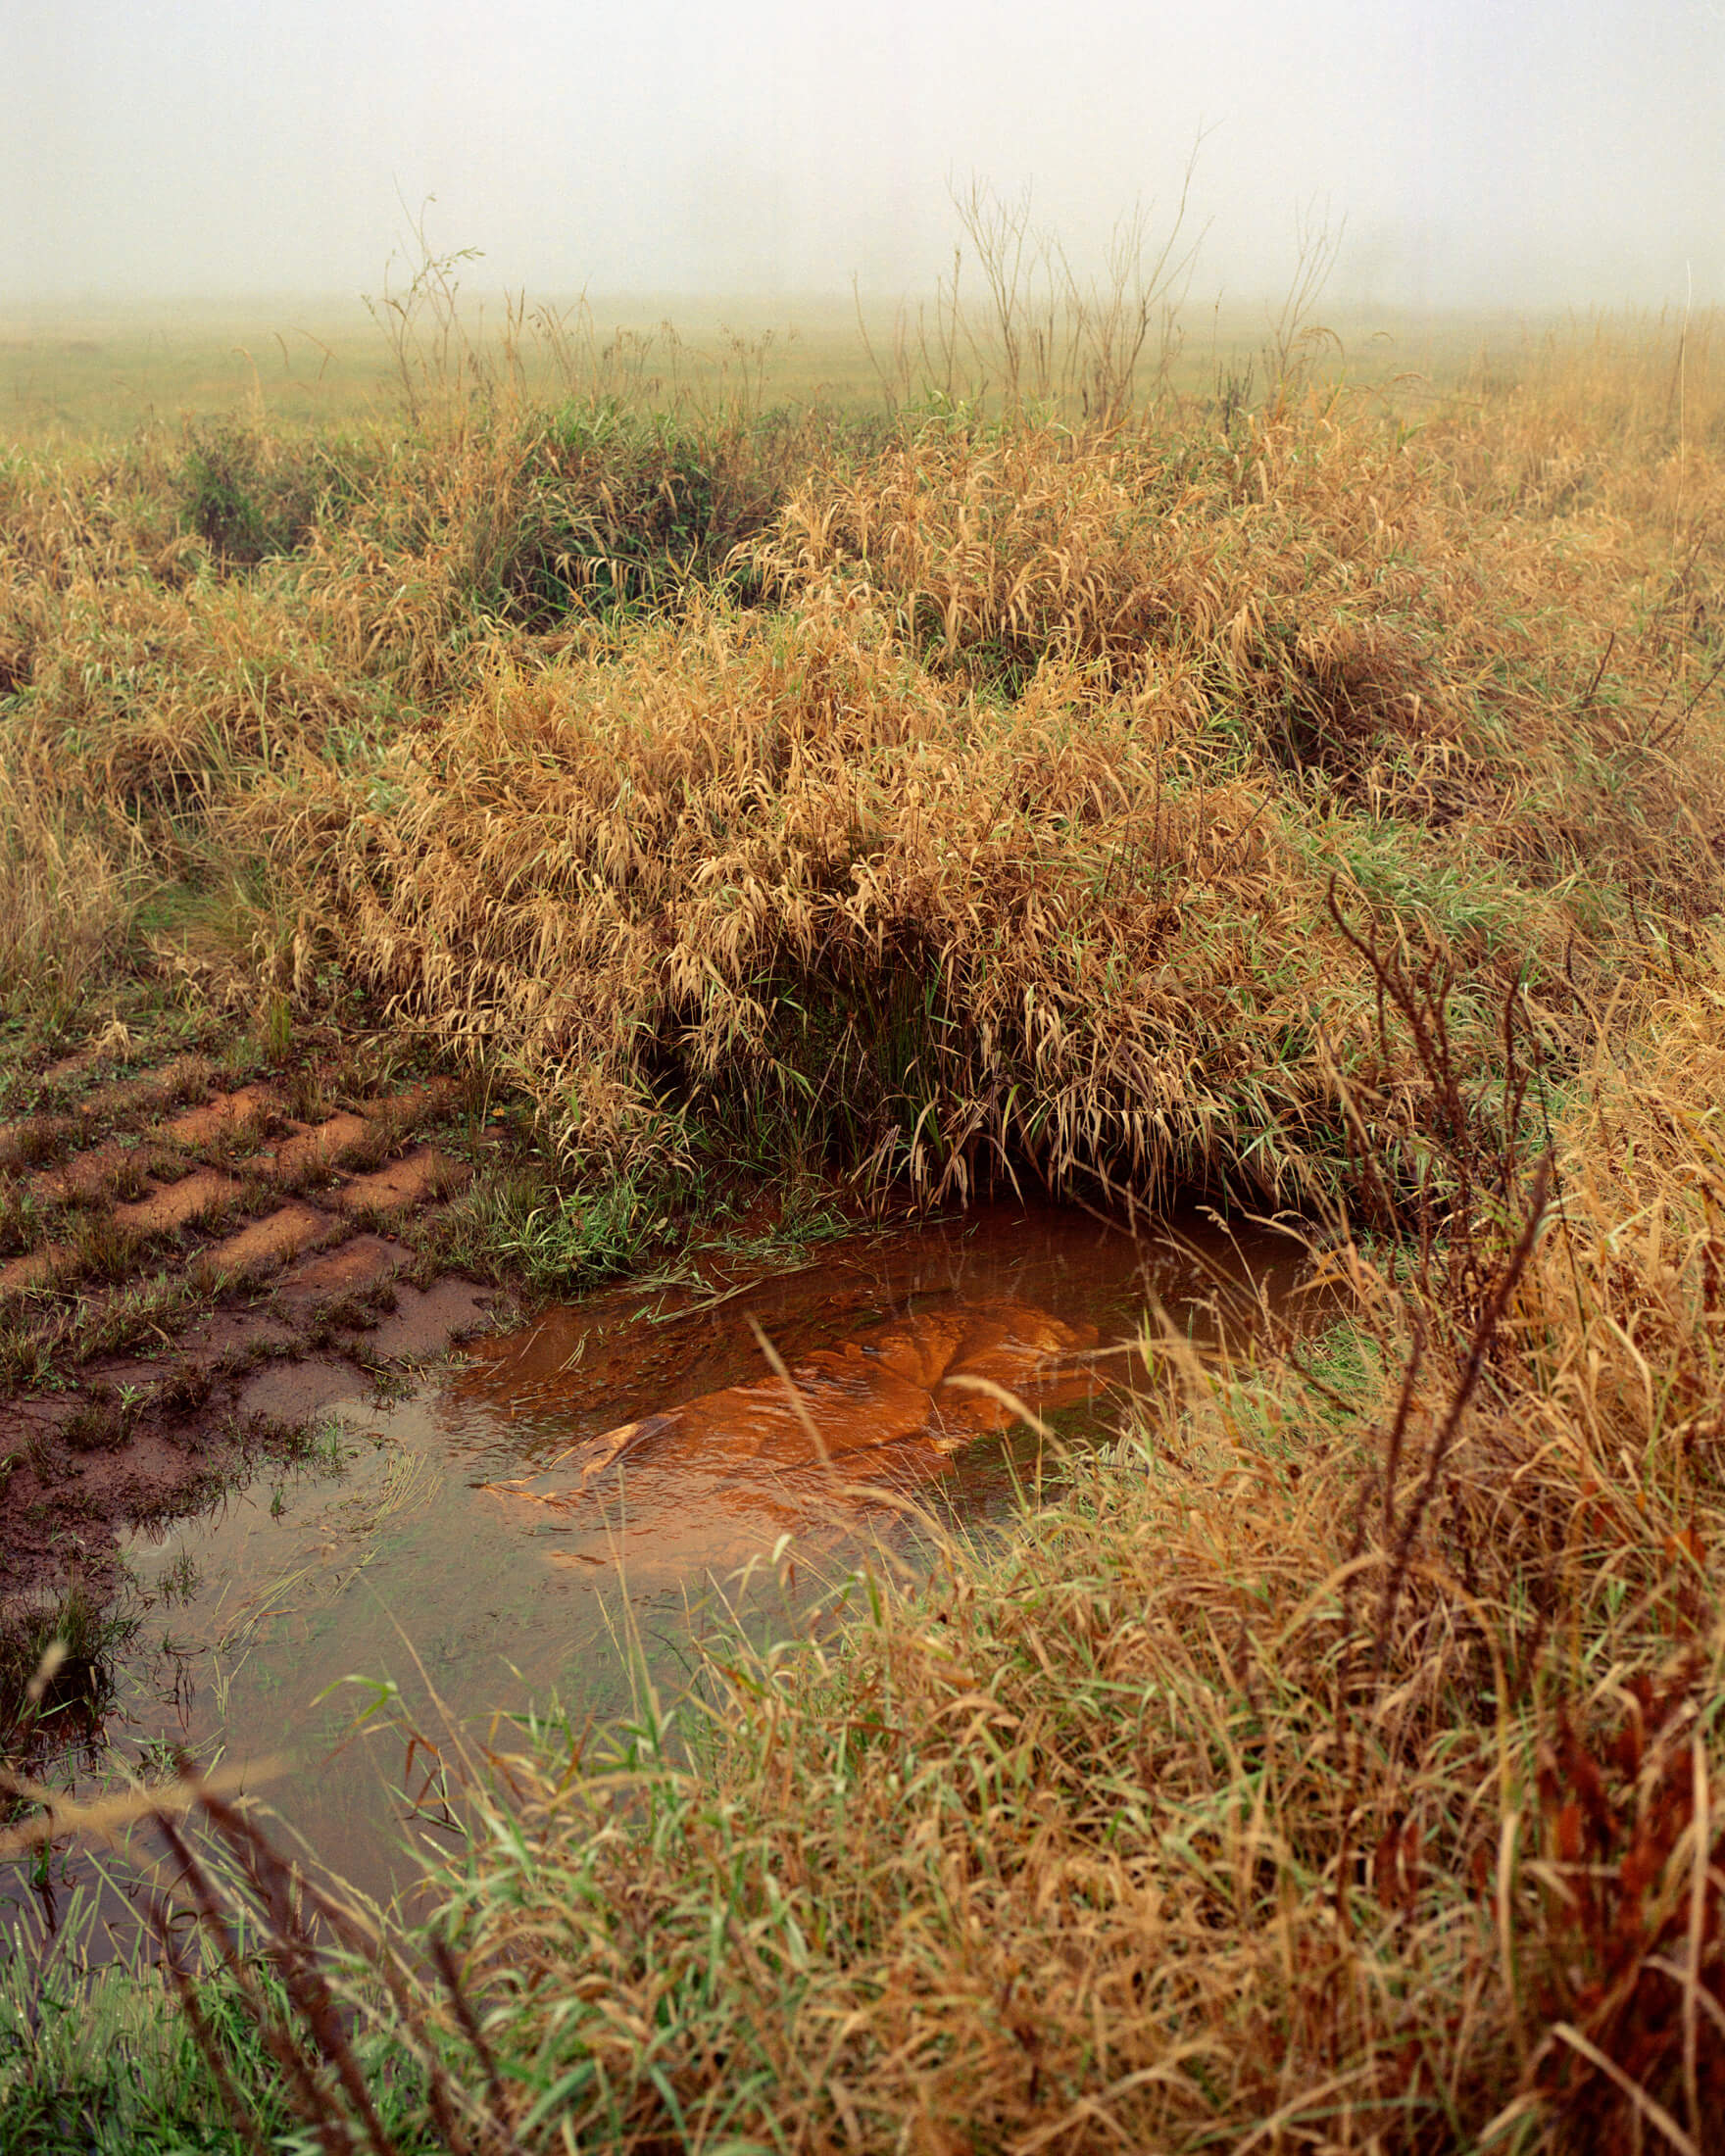 Anna Orłowska's photo of dyeing materials in an old watering place for cows. Rust coloring.